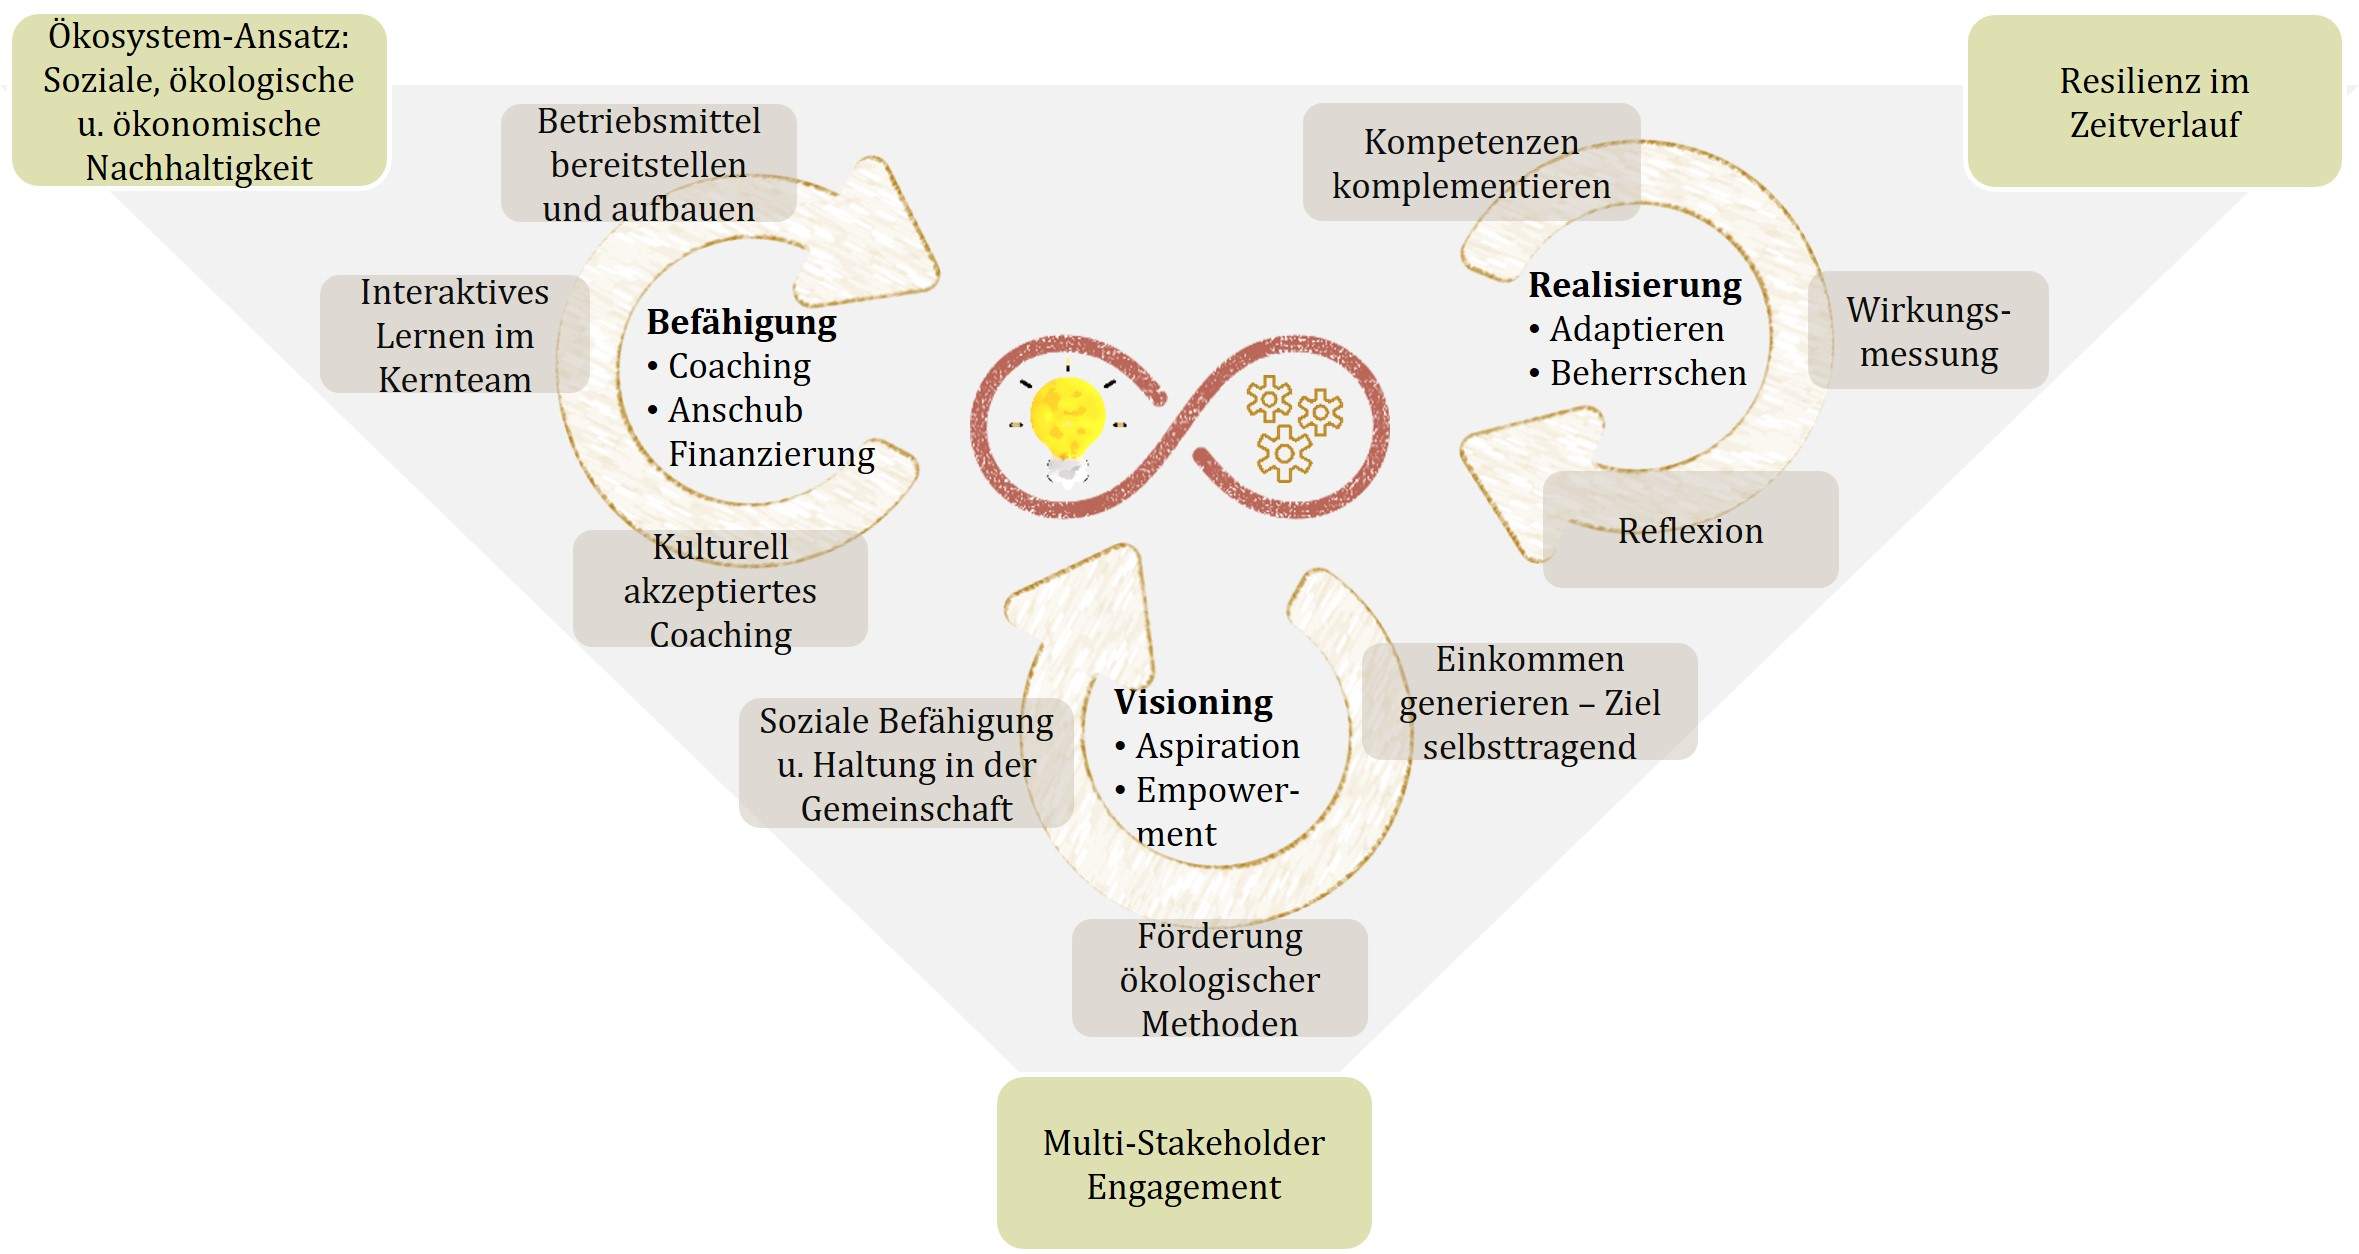 Transformation requires stakeholder engagement, an ecosystem approach and resilience build-up